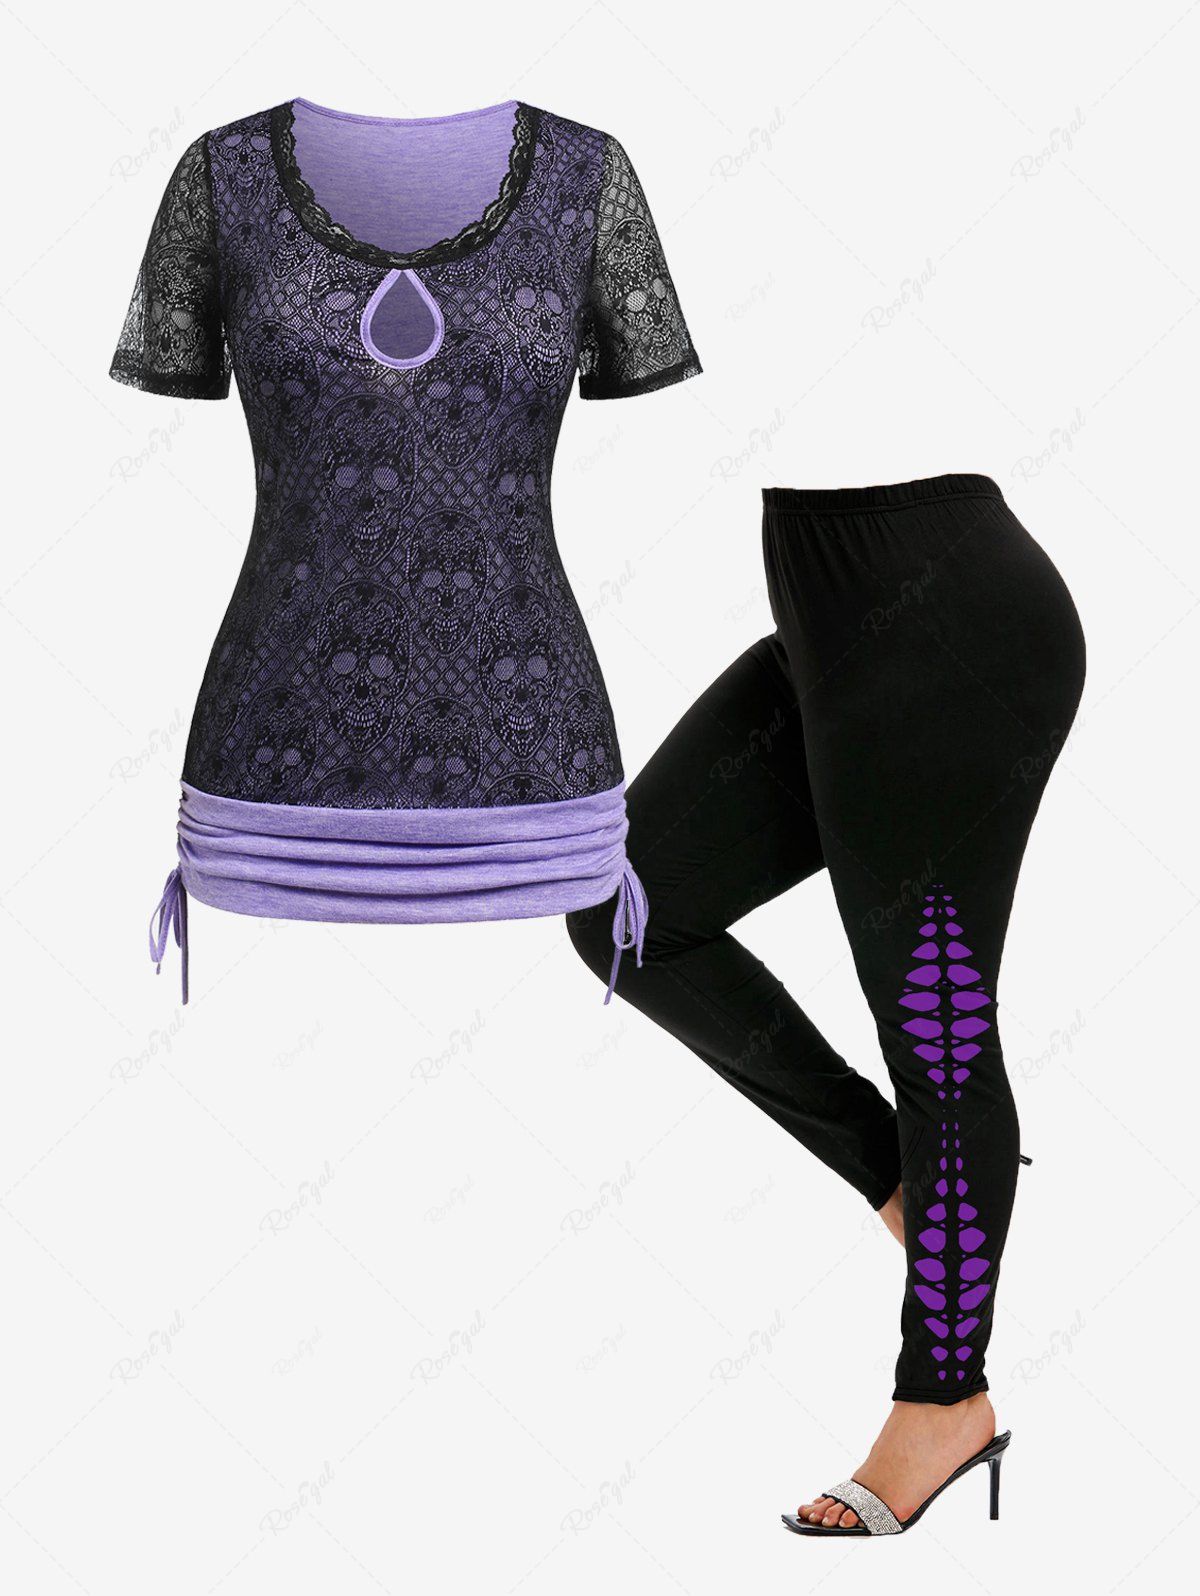 Discount Keyhole Skull Lace Cinched Tee and Skeleton Printed Leggings Gothic Outfit  